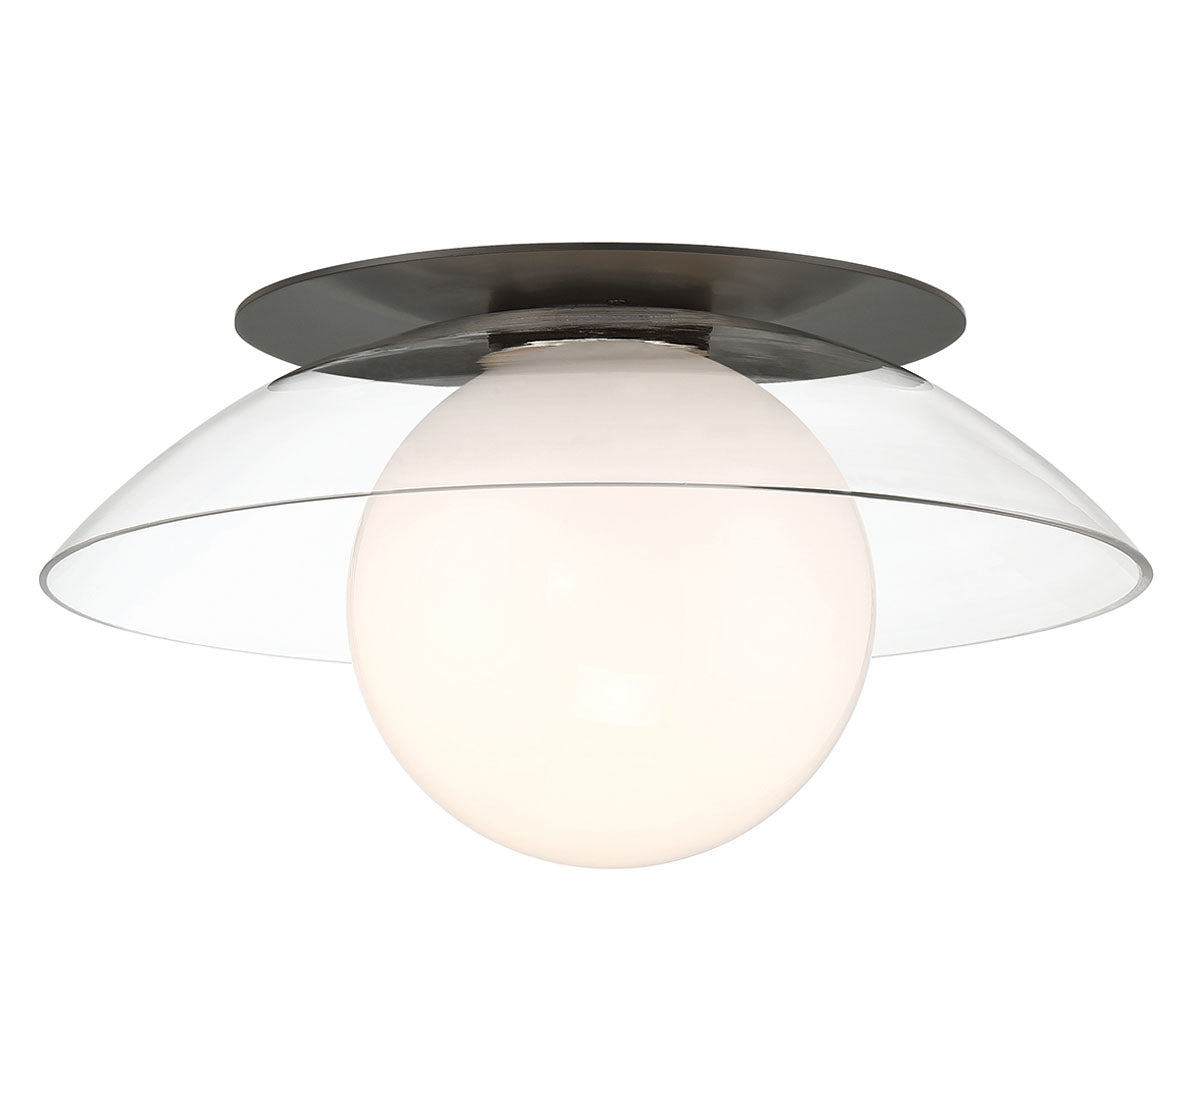 ANCONA 10124-01, Large 1 Light Ceiling/Wall Mount